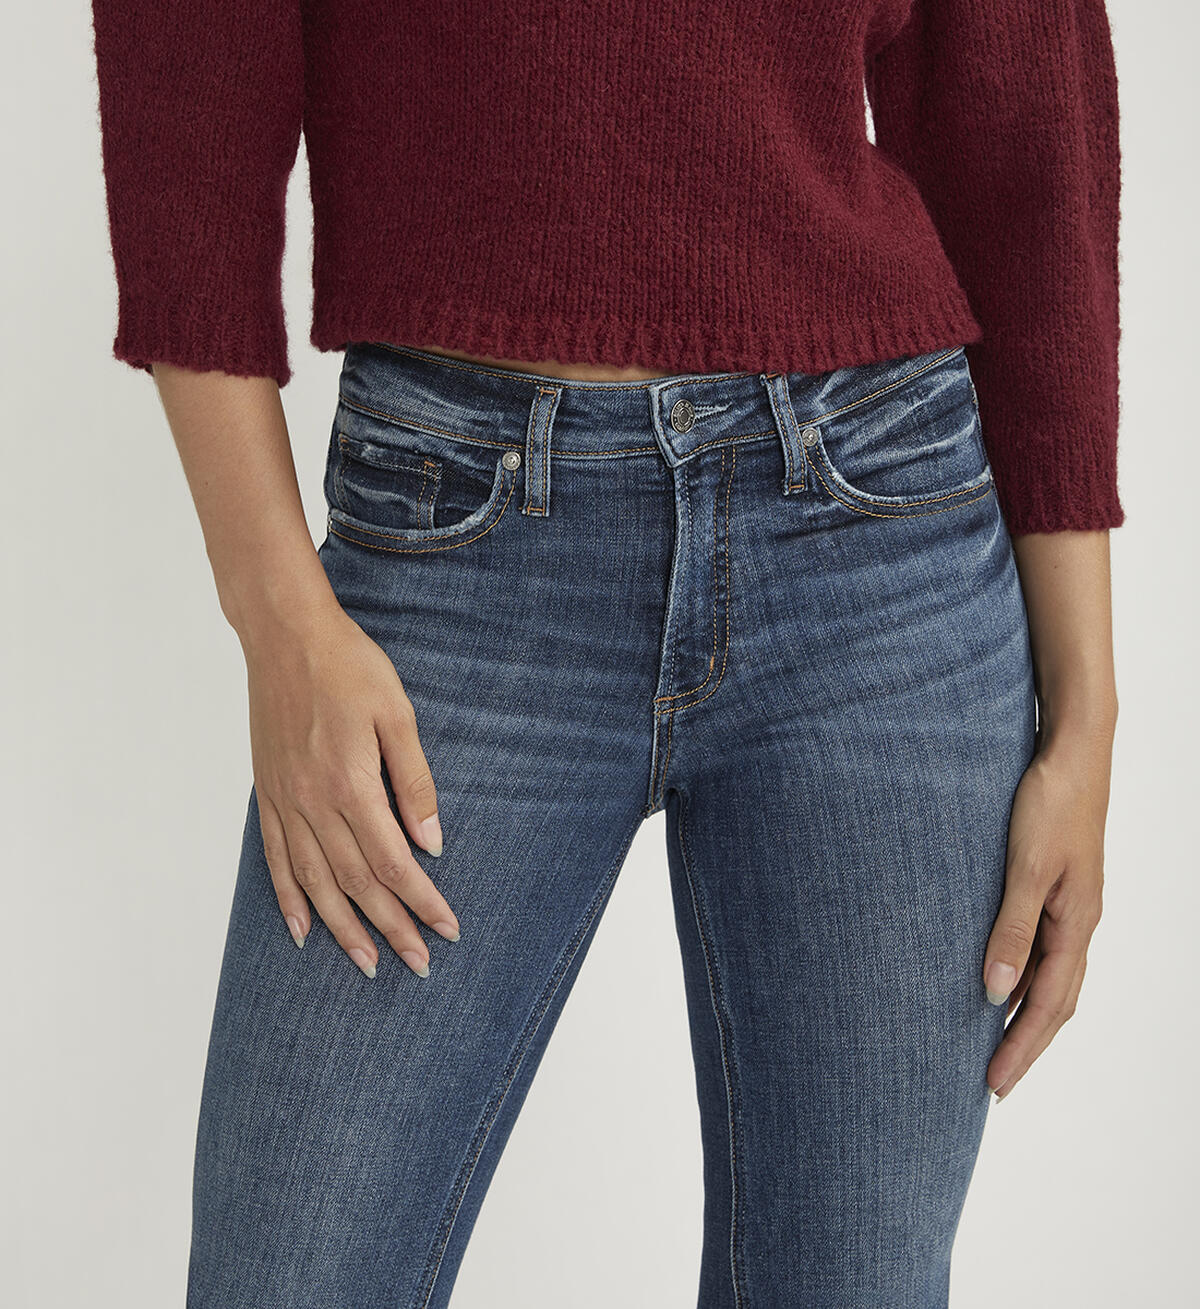 Most Wanted Mid Rise Flare Jeans, , hi-res image number 3